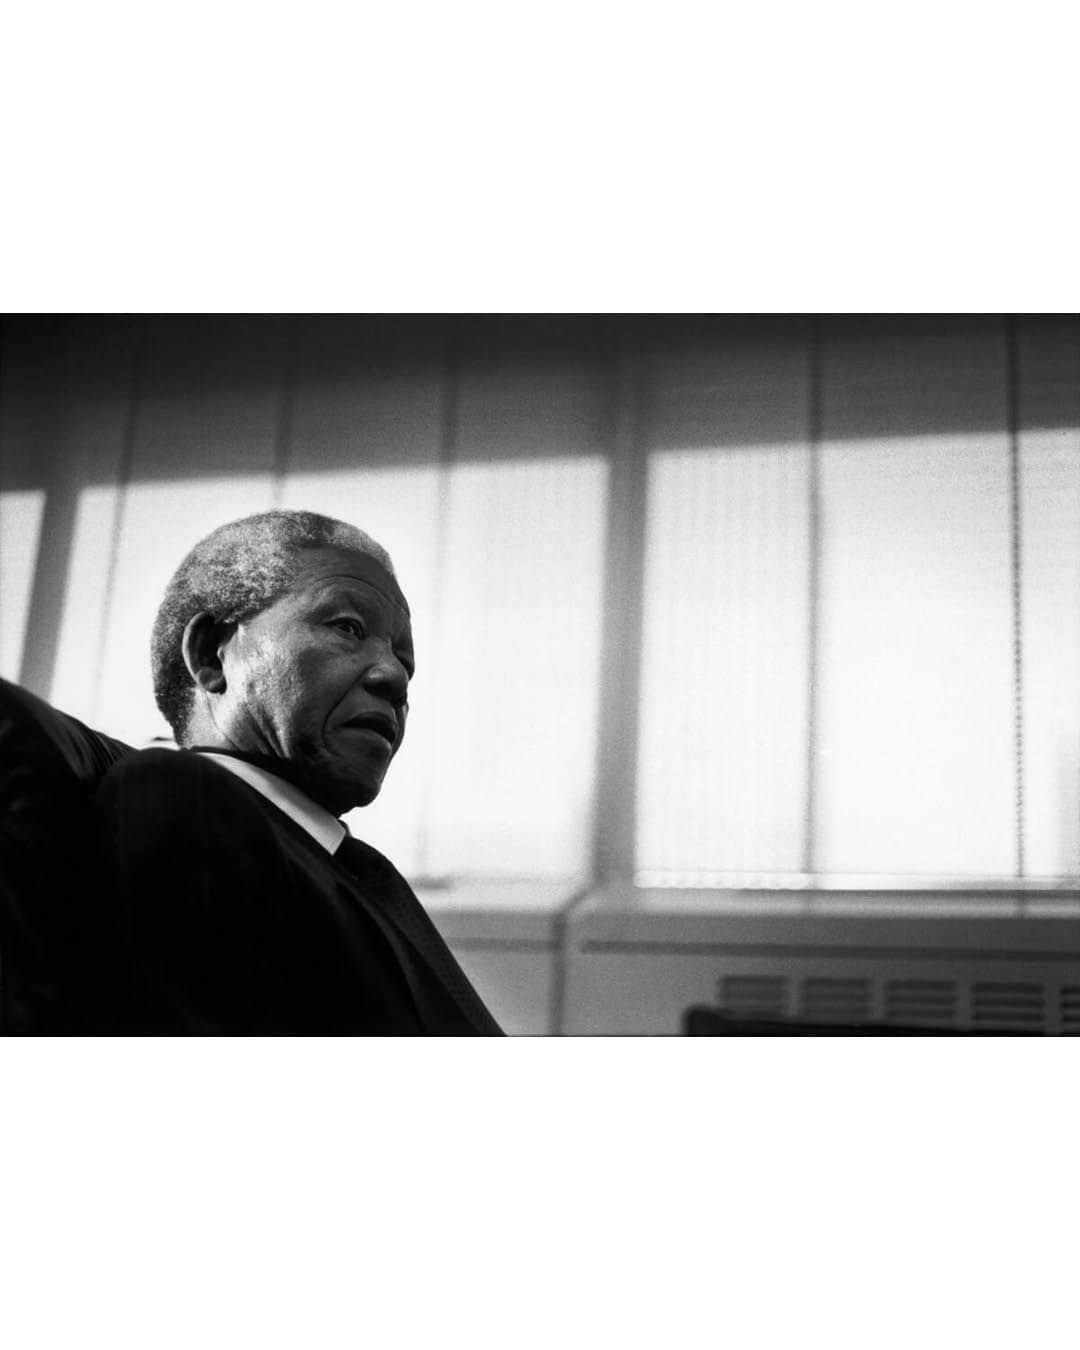 Magnum Photosさんのインスタグラム写真 - (Magnum PhotosInstagram)「In his own words, Nelson Mandela dedicated his life to the “struggle of the African people” through a lifetime of anti-apartheid activism. On the 10th anniversary of his death, we trace Mandela’s life through the Magnum archive. ⁠ ⁠ @ianberrymagnum photographed Mandela during his days as a young lawyer and his journey to presidency.⁠ ⁠ Images by Raymond @rdepardon depict Mandela in his office and follow in his footsteps to Robben Island Prison where he spent 18 of his 27 years in prison.⁠ ⁠ @biekedepoorter documented as the people of South Africa paid their respects to former President Nelson Mandela in 2013. ⁠ ⁠ PHOTOS (left to right):⁠ ⁠ (1) Nelson Mandela after his release. South Africa. 1990. © Chris @steeleperkins / Magnum Photos⁠ ⁠ (2) Nelson Mandela, then acting as a defense lawyer during the first major trial for treason in South Africa. Johannesburg, South Africa. 1961. © @ianberrymagnum / Magnum Photos⁠ ⁠ (3) A crowd awaiting the liberation of Nelson Mandela. Cape Town, South Africa. 1990. © Patrick @pzachmann / Magnum Photos⁠ ⁠ (4) Nelson Mandela, leader of the ANC party, in his office. Johannesburg, South Africa. 1993. © Raymond @rdepardon / Magnum Photos⁠ ⁠ (5) Cell in which Nelson Mandela spent 18 of his years 27 years in prison. Robben Island, South Africa. 1993. © Raymond @rdepardon / Magnum Photos⁠ ⁠ (6) Nelson Mandela speaks at an ANC rally. Johannesburg, South Africa. 1994. © @leonardfreed / Magnum Photos⁠ ⁠ (7) Supporters climb to every vantage point while awaiting the arrival of Nelson Mandela. Natal, Lamontville, South Africa. 1994. © @ianberrymagnum / Magnum Photos⁠ ⁠ (8) Nelson Mandela, Richard Harris and James Earl Jones at the premiere of Cry the Beloved. New York City, USA. 1995. © @elireedmagnum / Magnum Photos⁠ ⁠ (9) Reaction to the death of Nelson Mandela on the streets outside of his former home. Soweto, South Africa. 2013. © @biekedepoorter / Magnum Photos⁠ ⁠ (10) Tourist boat tour to Robben Island where Nelson Mandela was imprisoned from 1964-82. Cape Town, South Africa. 2016. © @thomasdworzak / Magnum Photos」12月6日 1時01分 - magnumphotos